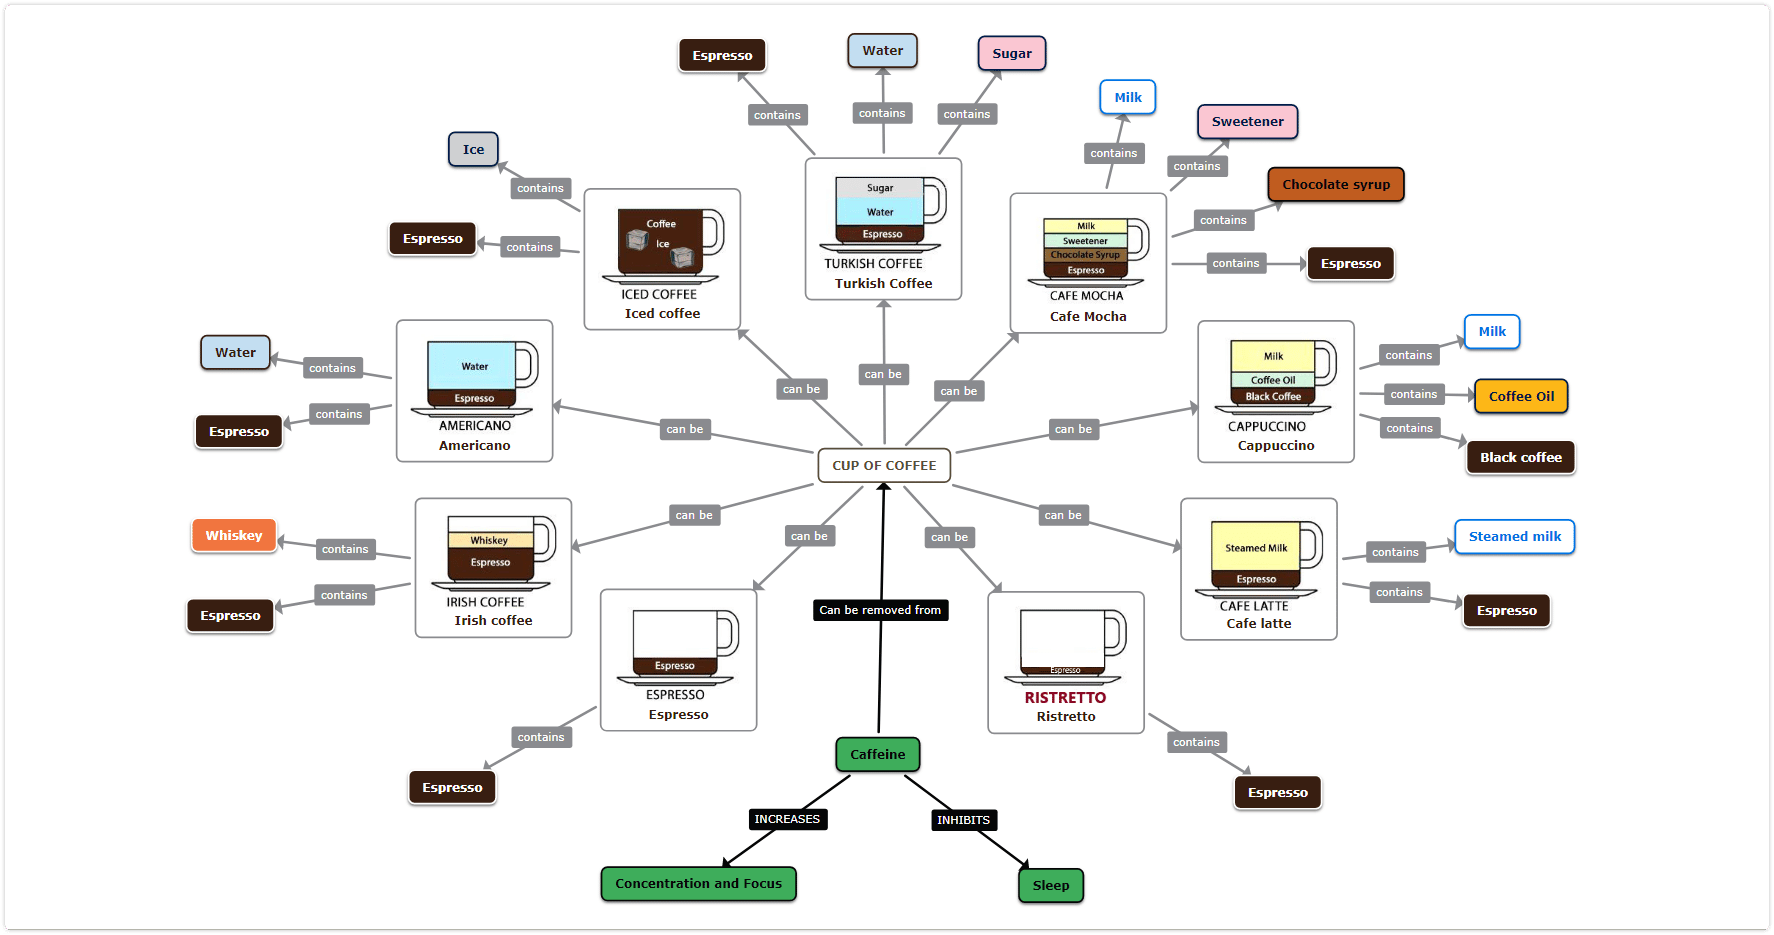 Coffee concept map